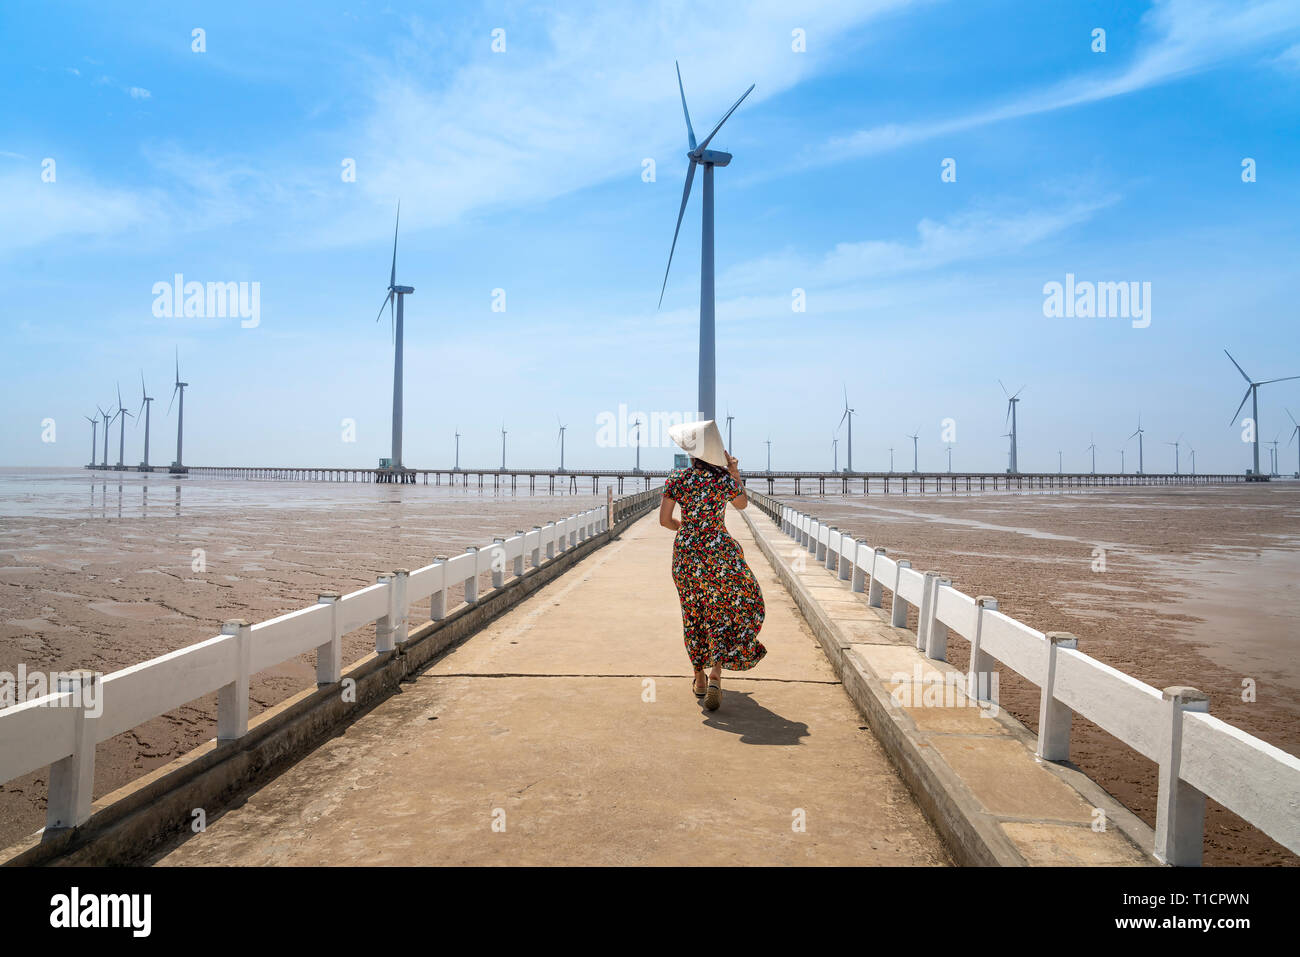 Wind turbines generating electricity on the sea at Bac Lieu, Vietnam - January 26, 2019: Seascape with Turbine Green Energy Electricity, Windmill for Stock Photo